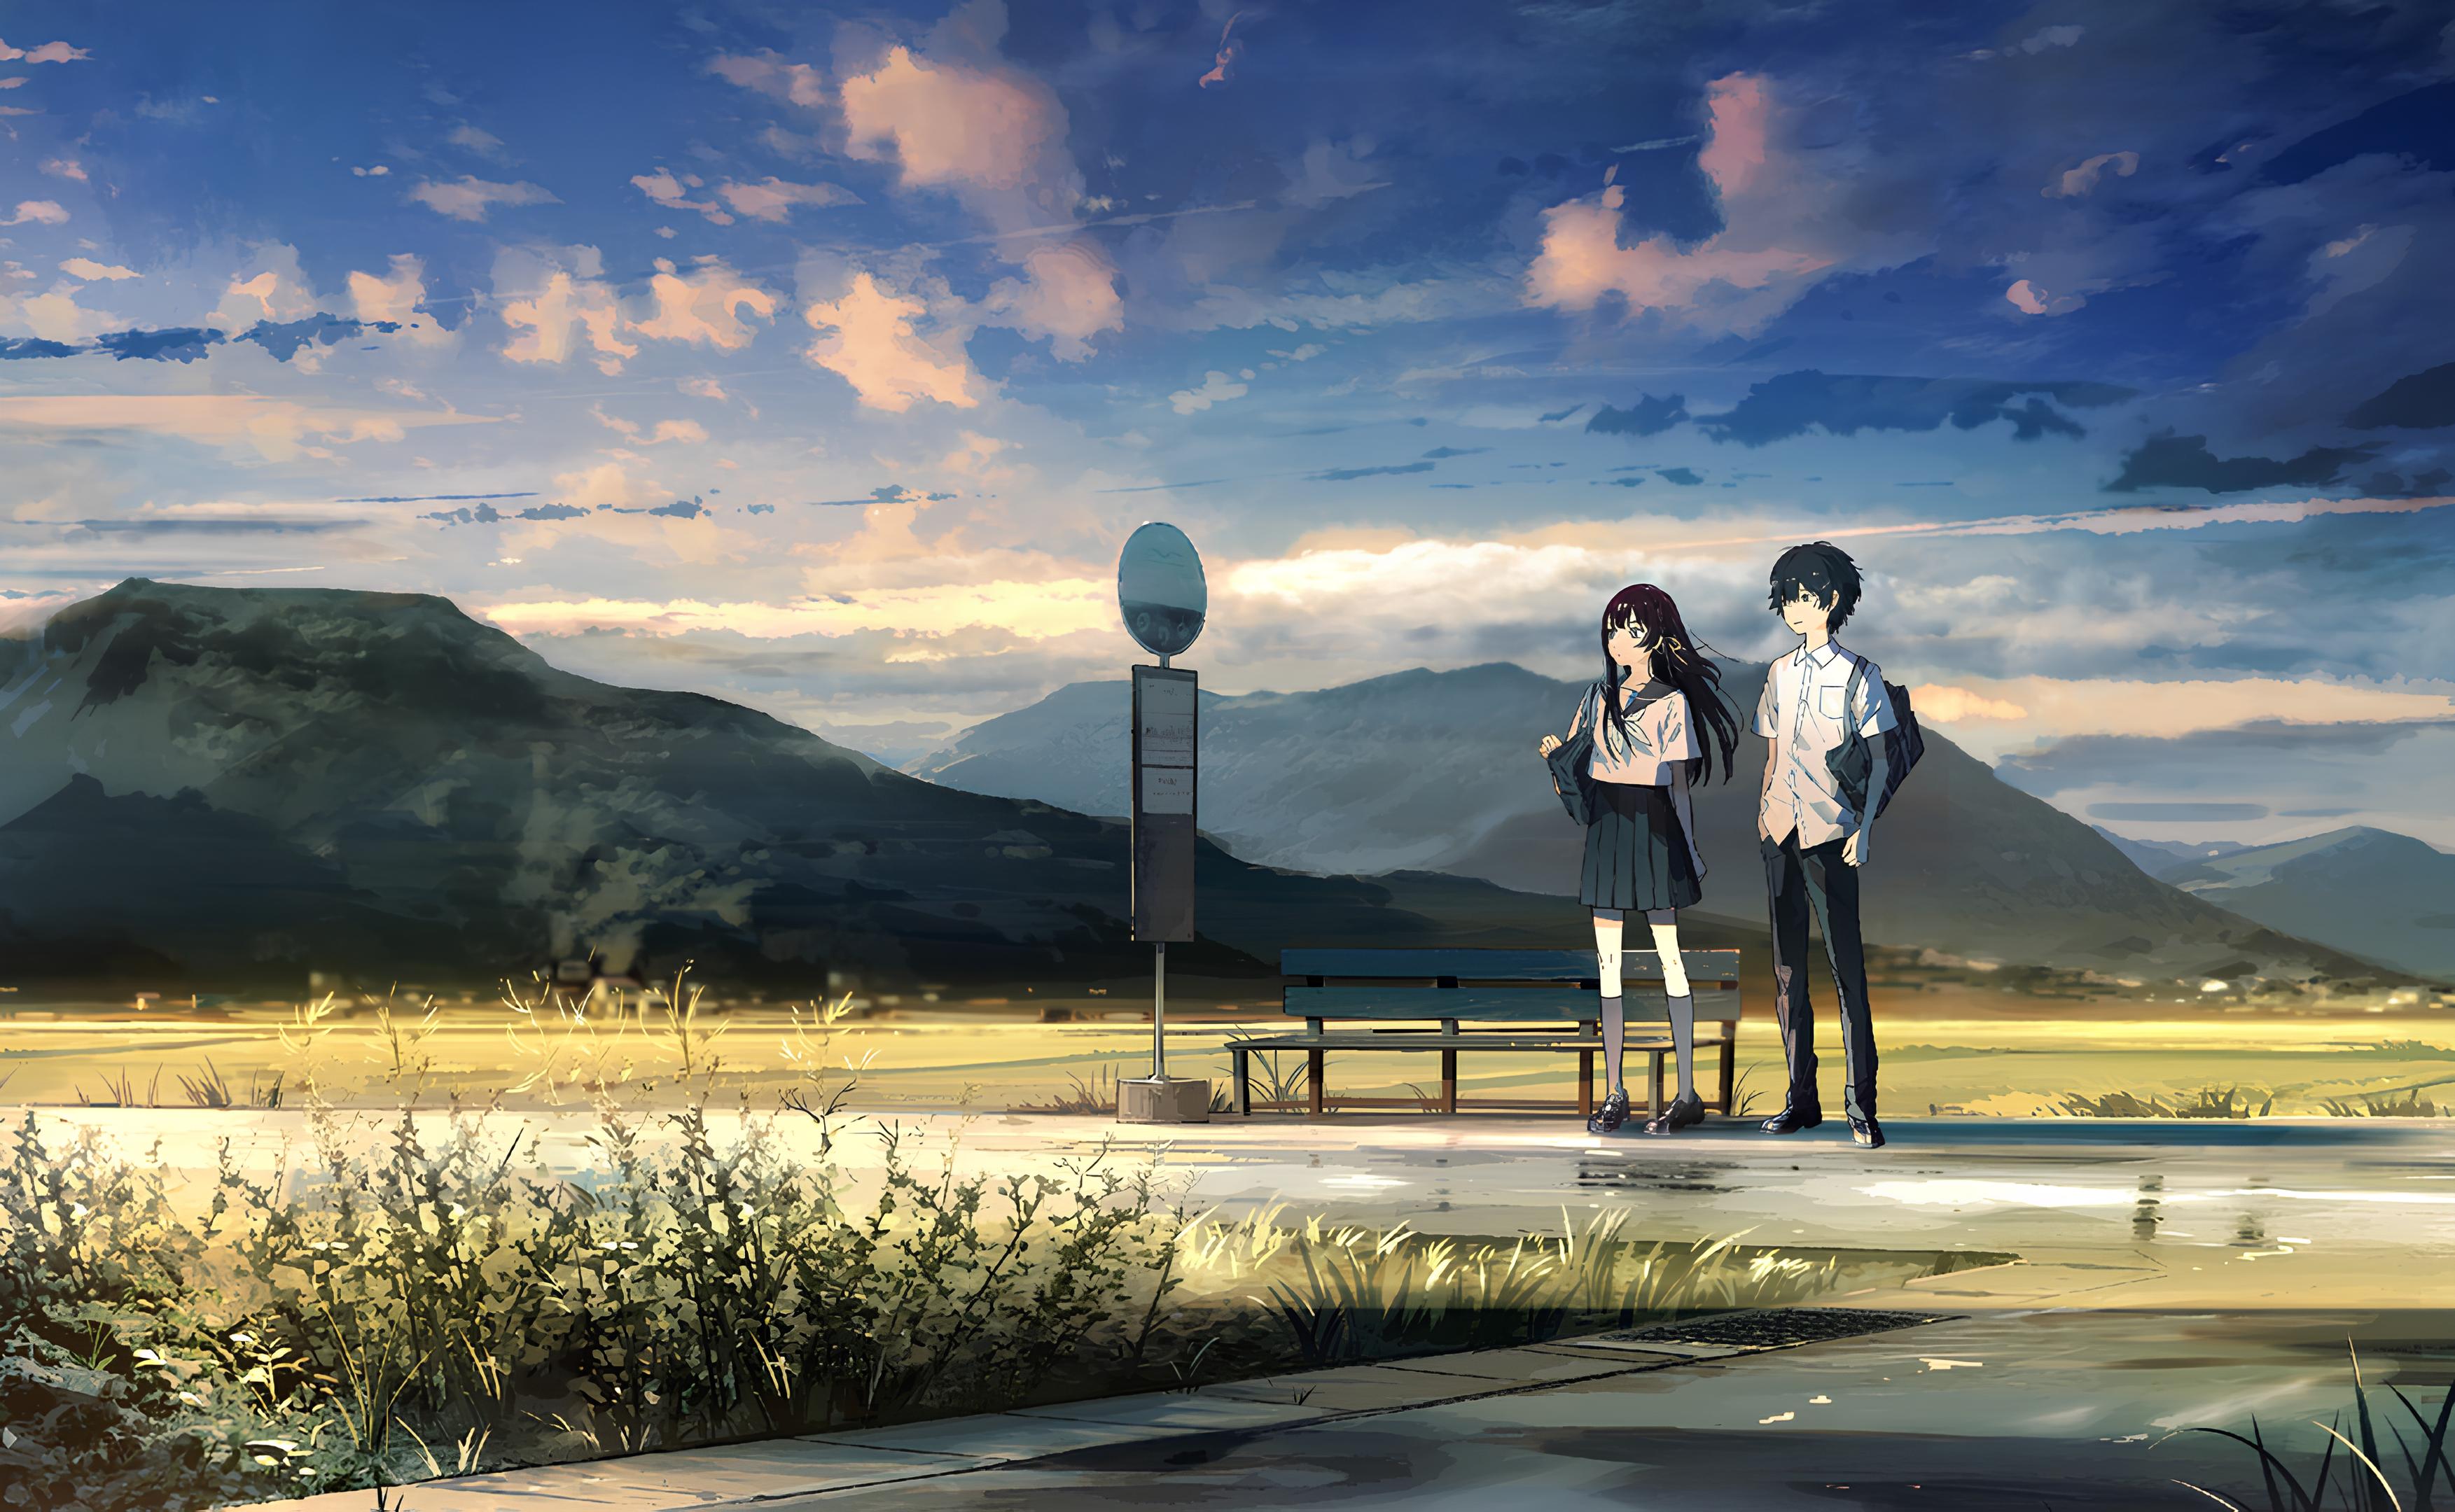 The Tunnel To Summer The Exit Of Goodbye Dark Hair People Sea Mountains Sky Anime Boys Anime Girls S 3506x2160